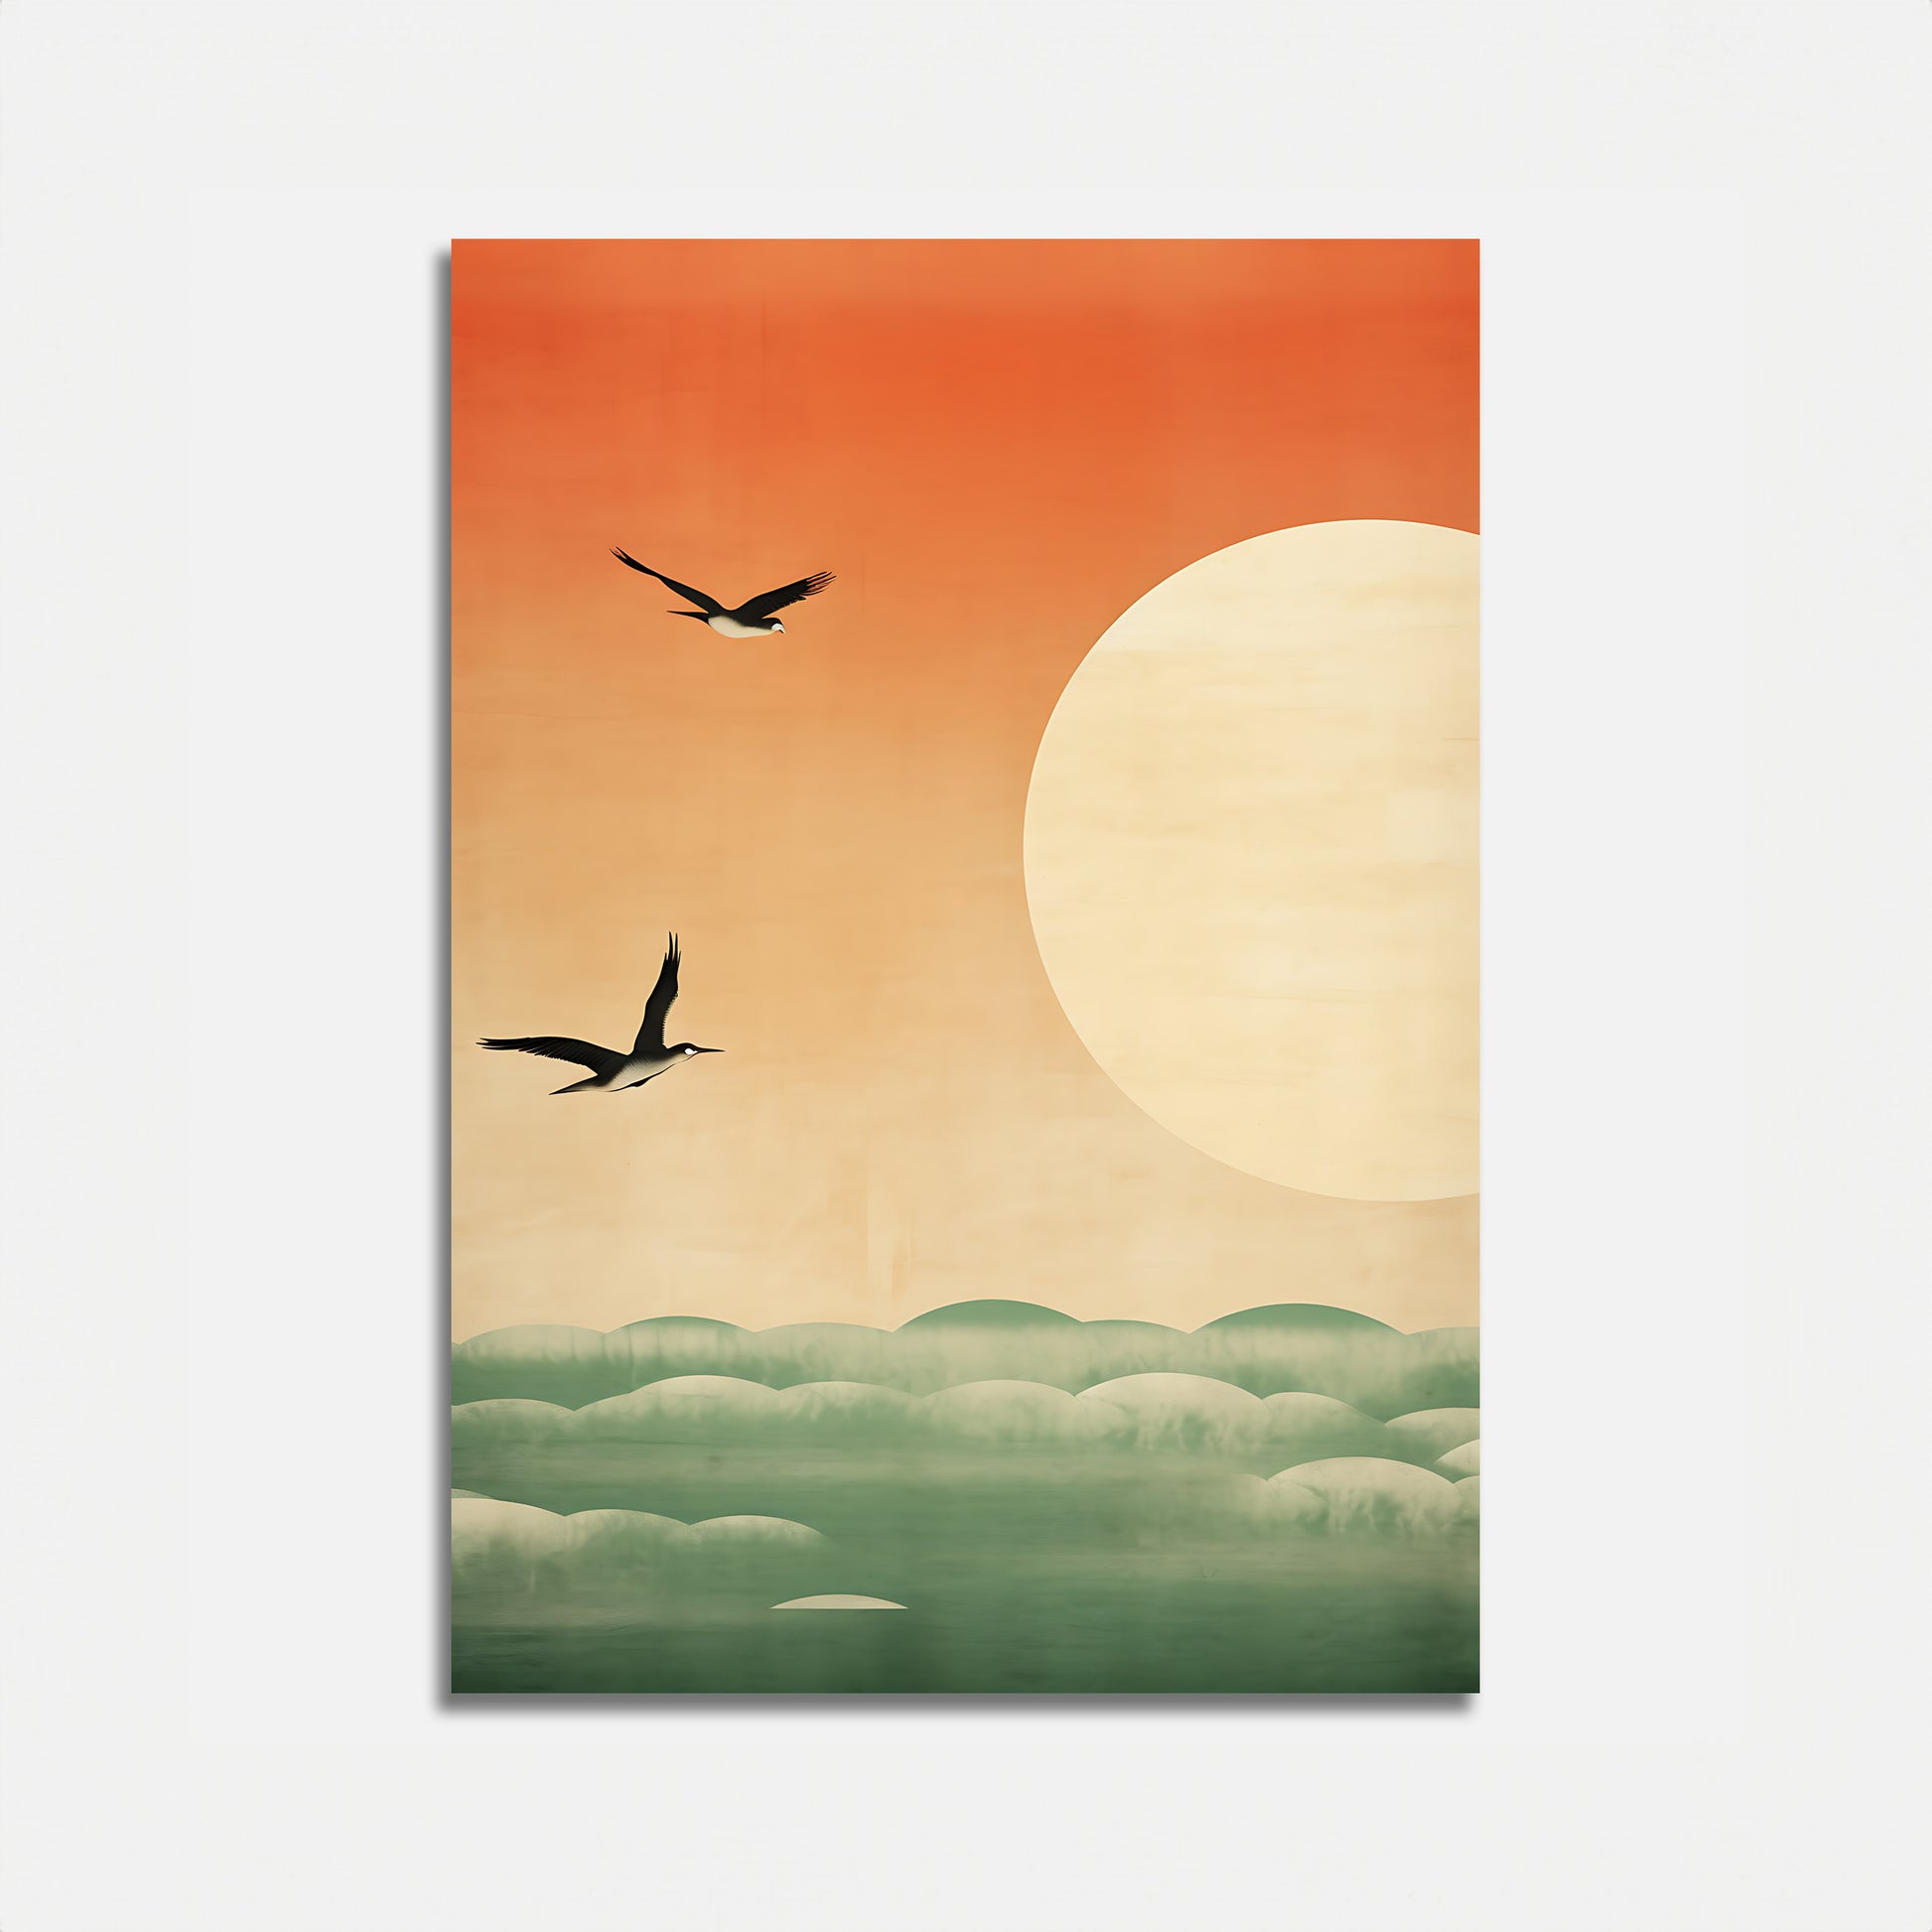 Minimalist painting of birds flying at sunset with a large sun and green hills.